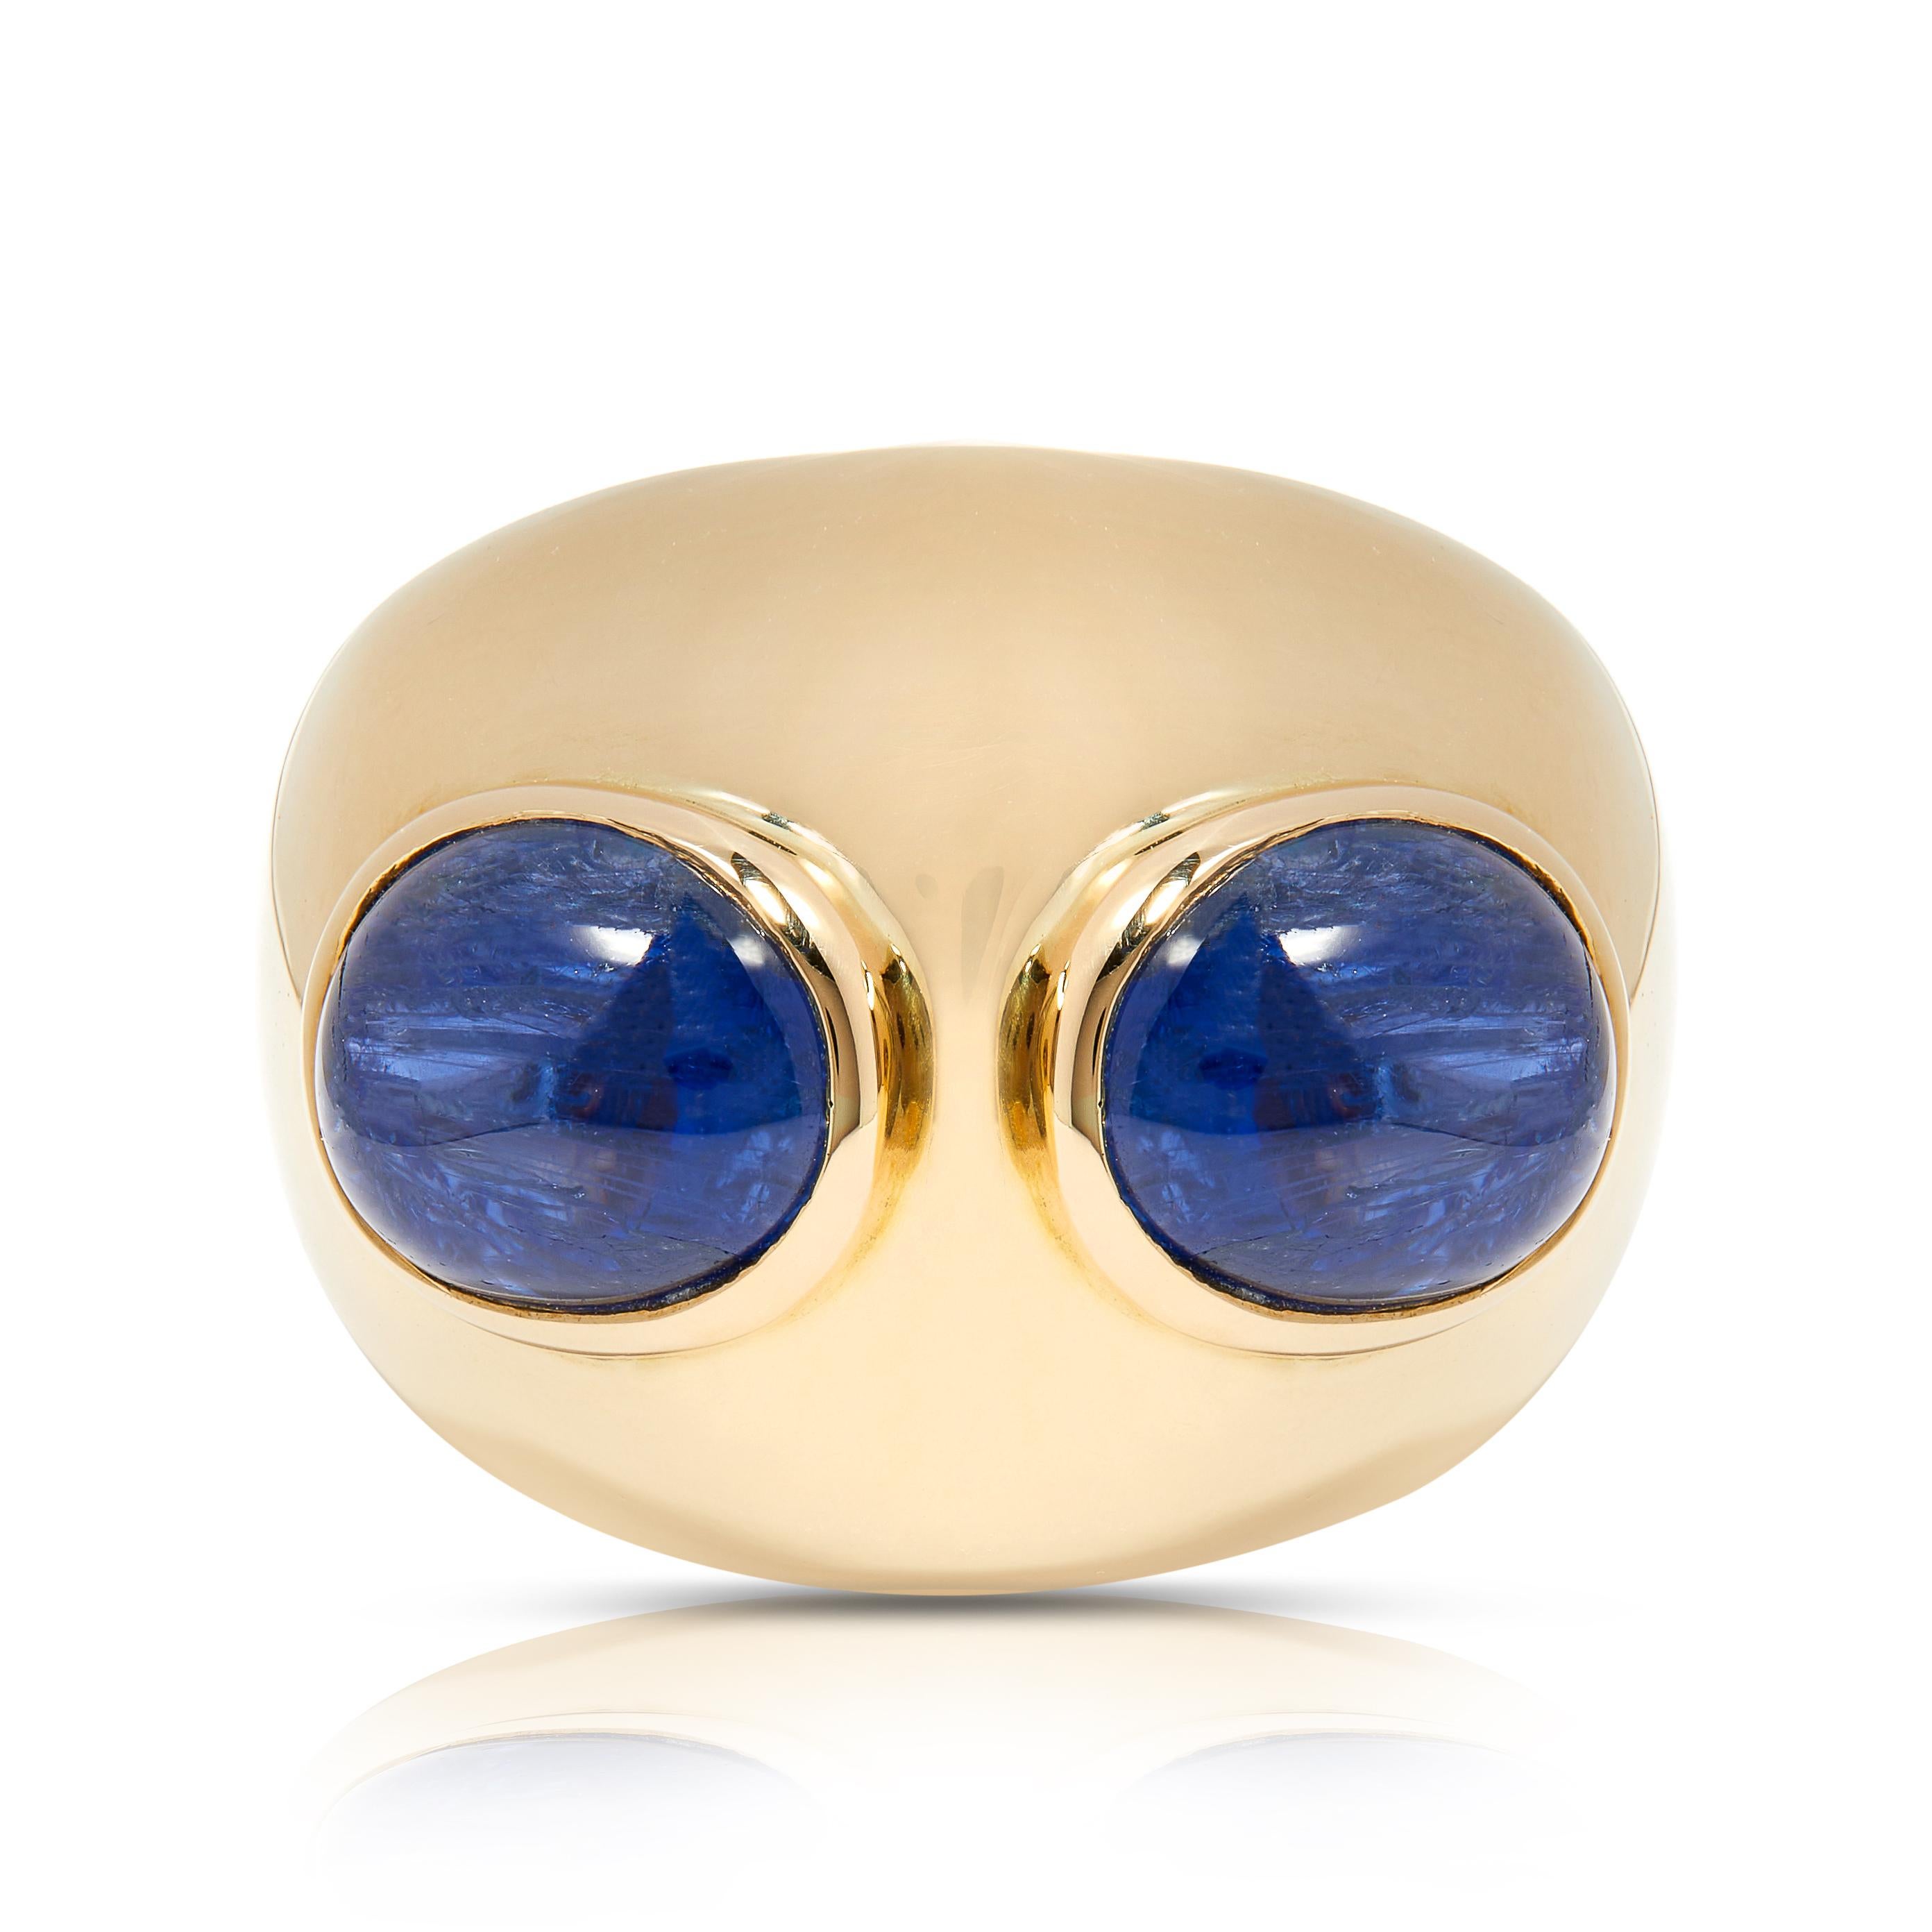 Contemporary 18 Carat Gold Cocktail Ring with Blue Sapphire Cabochons In Excellent Condition For Sale In Dubai, DU